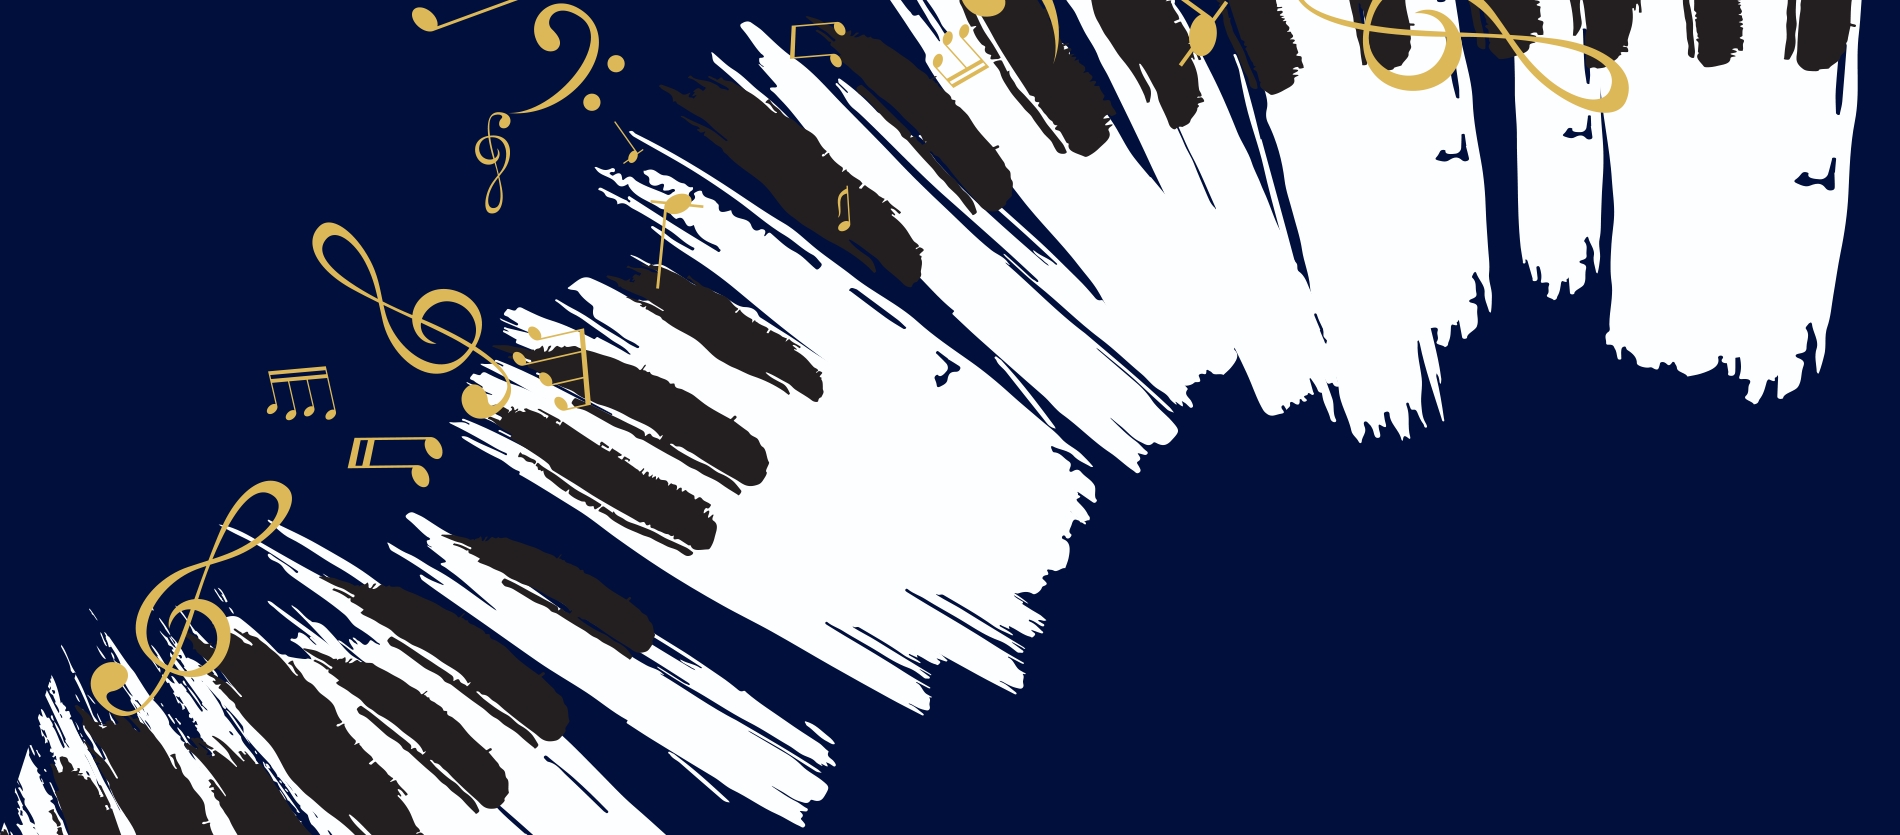 Header image for 2022 Morning Music events at KPAC - has piano keys and music notes on a dark blue background